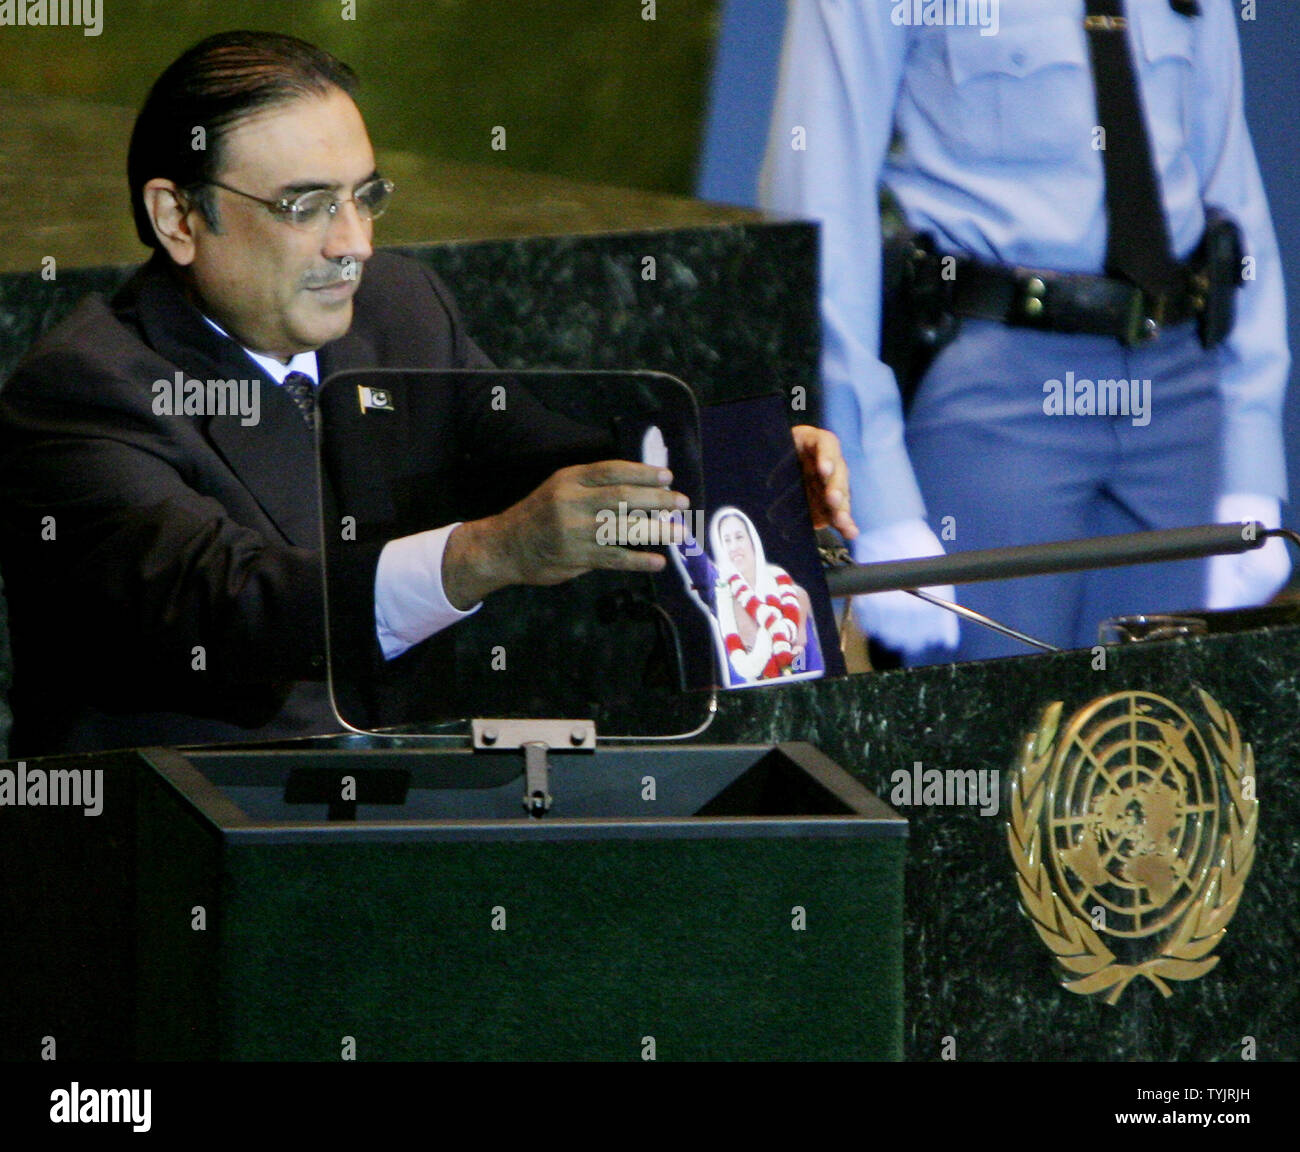 Asif Ali Zardari, President of Pakistan and husband of Benazir Bhutto, displays a photo of the assassinated political leader as he addresses the 63rd session of the General Assembly at the UN on September 25, 2008 in New York City. (UPI Photo/Monika Graff) Stock Photo